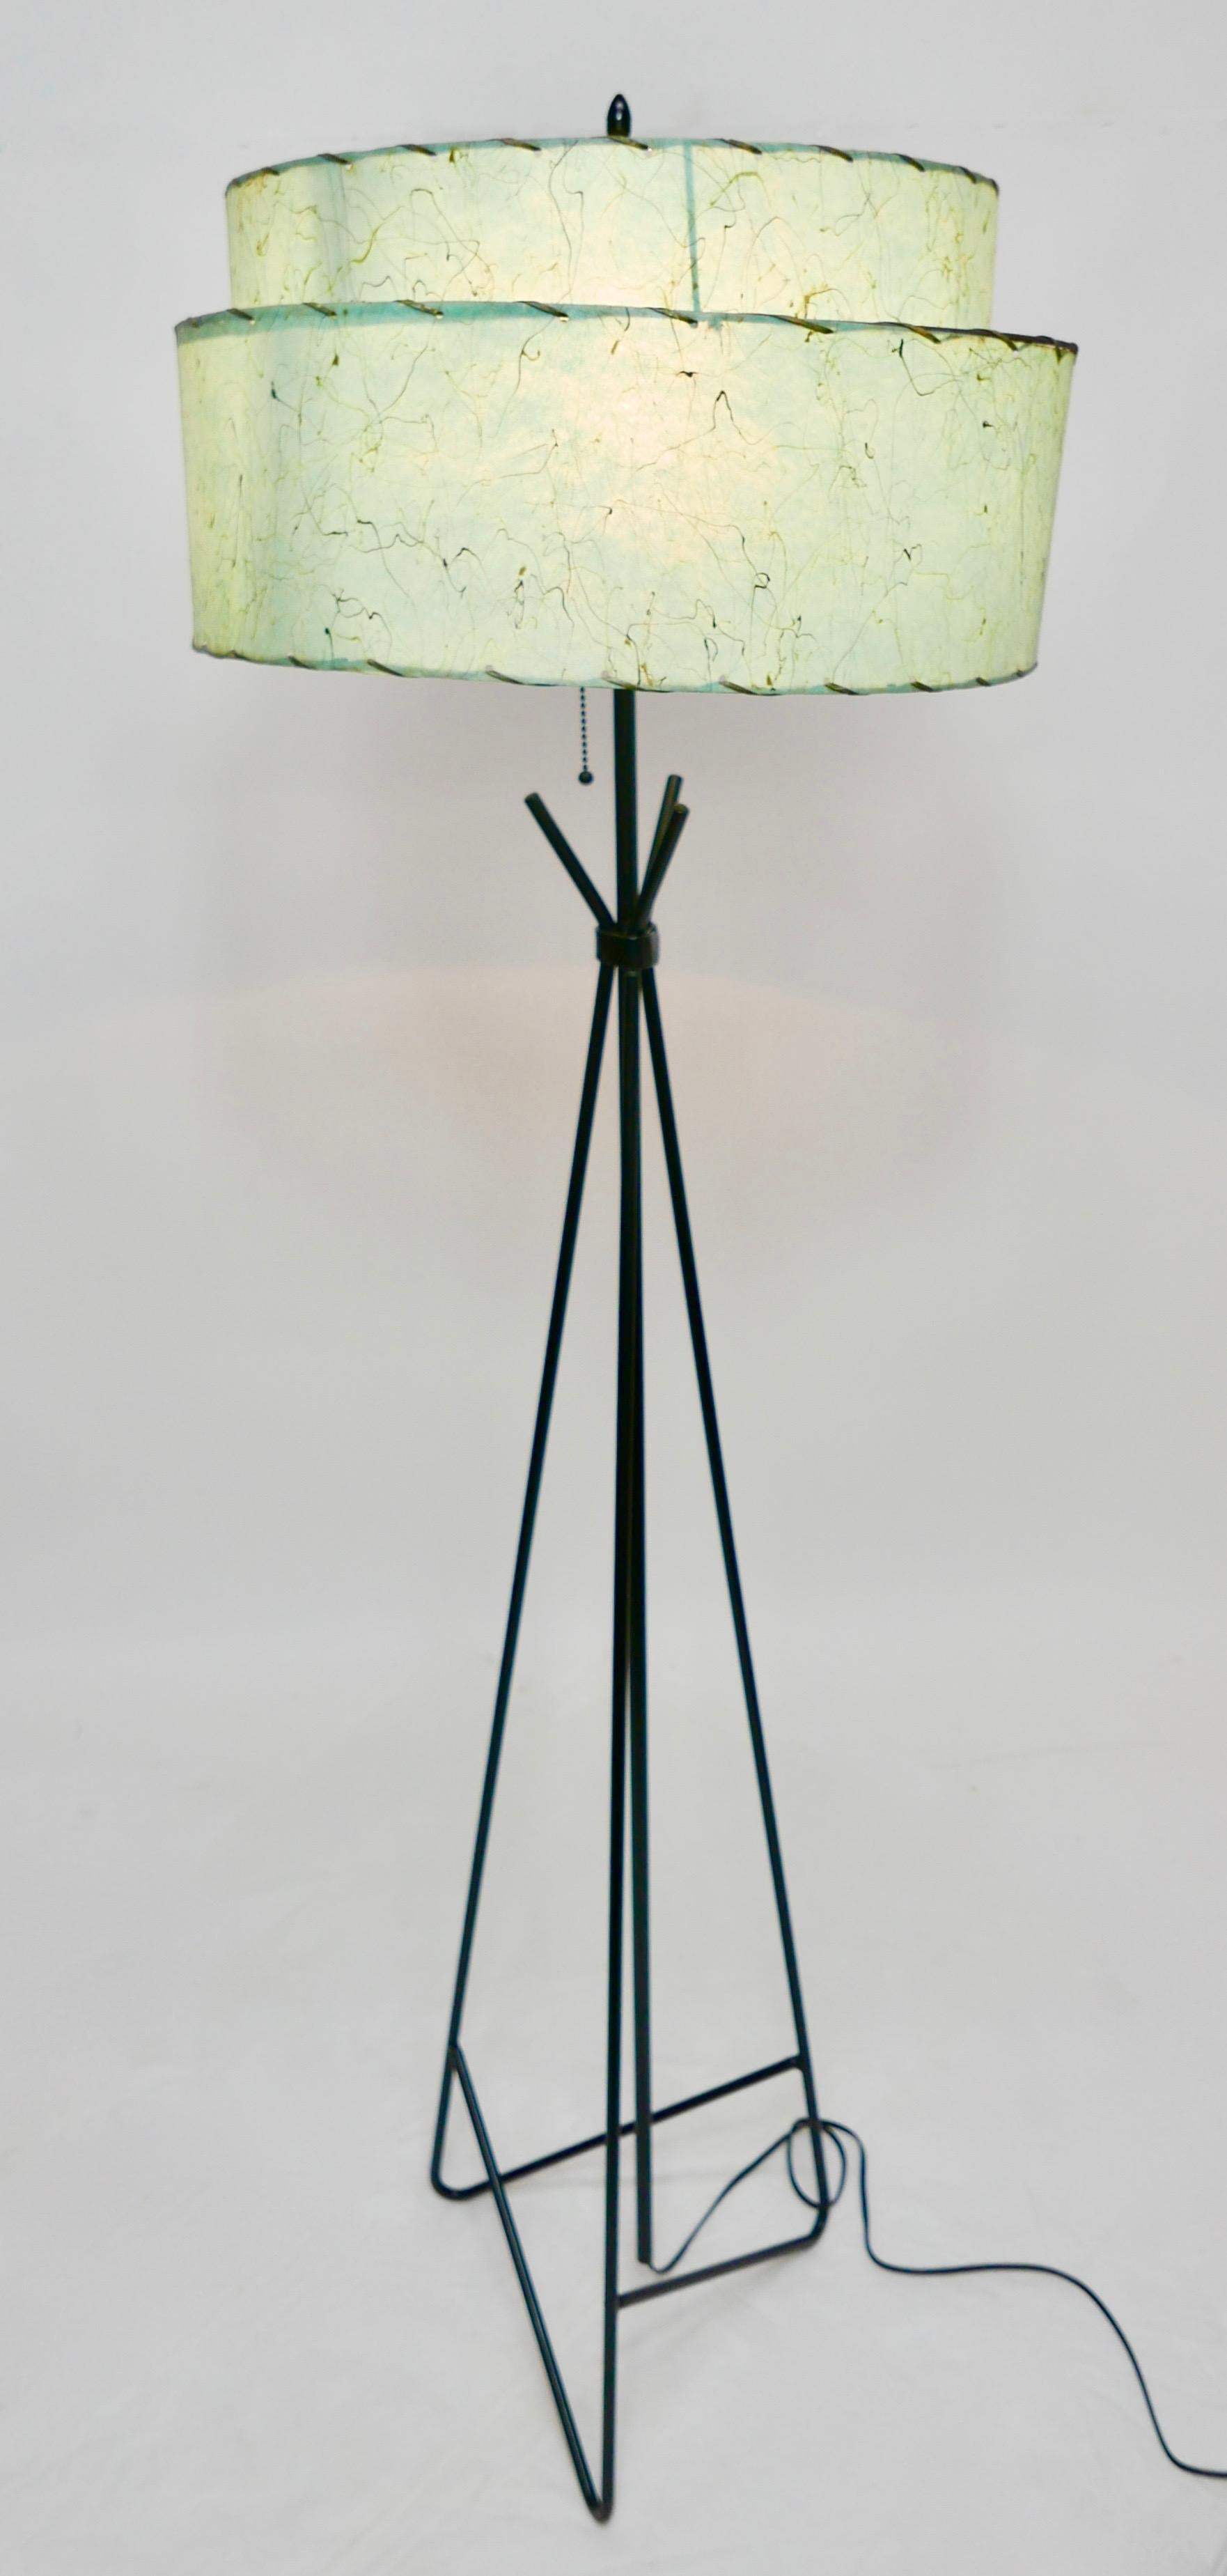 American Mid-Century Modern Period Floor Lamp with Original Whip-Stitched Shade 5